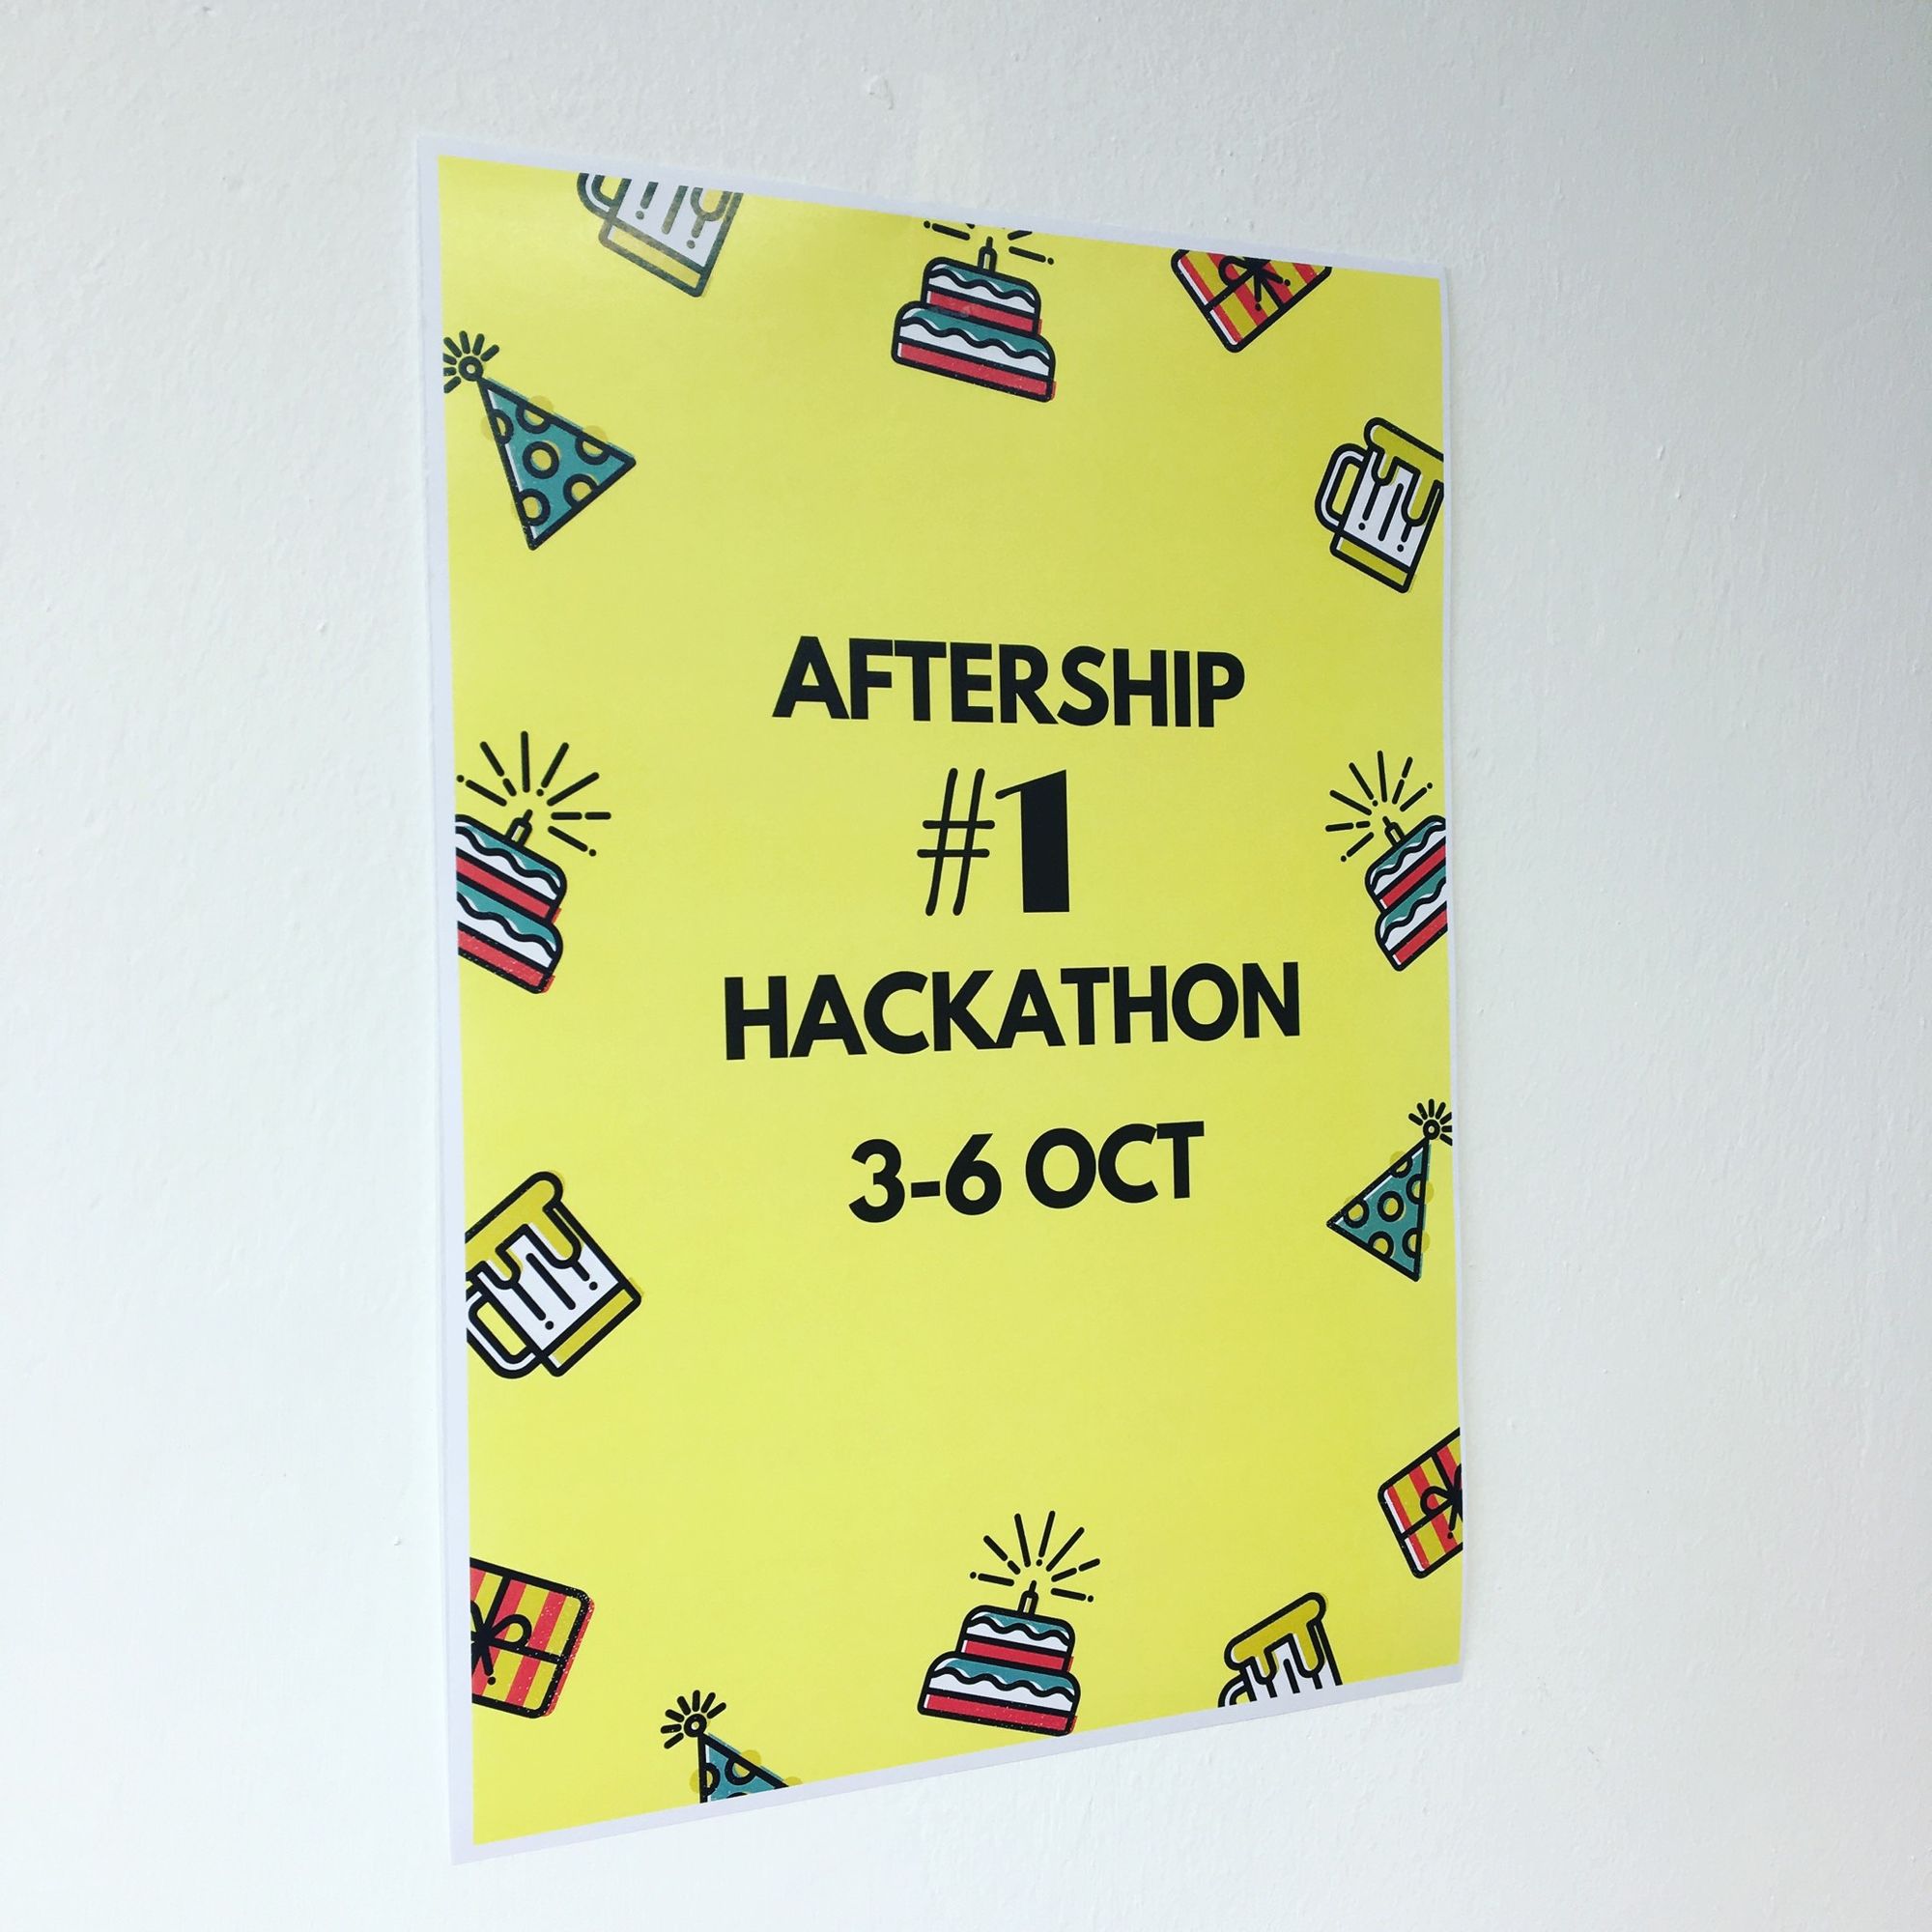 We Organised a Hackathon: Here's What We Learned